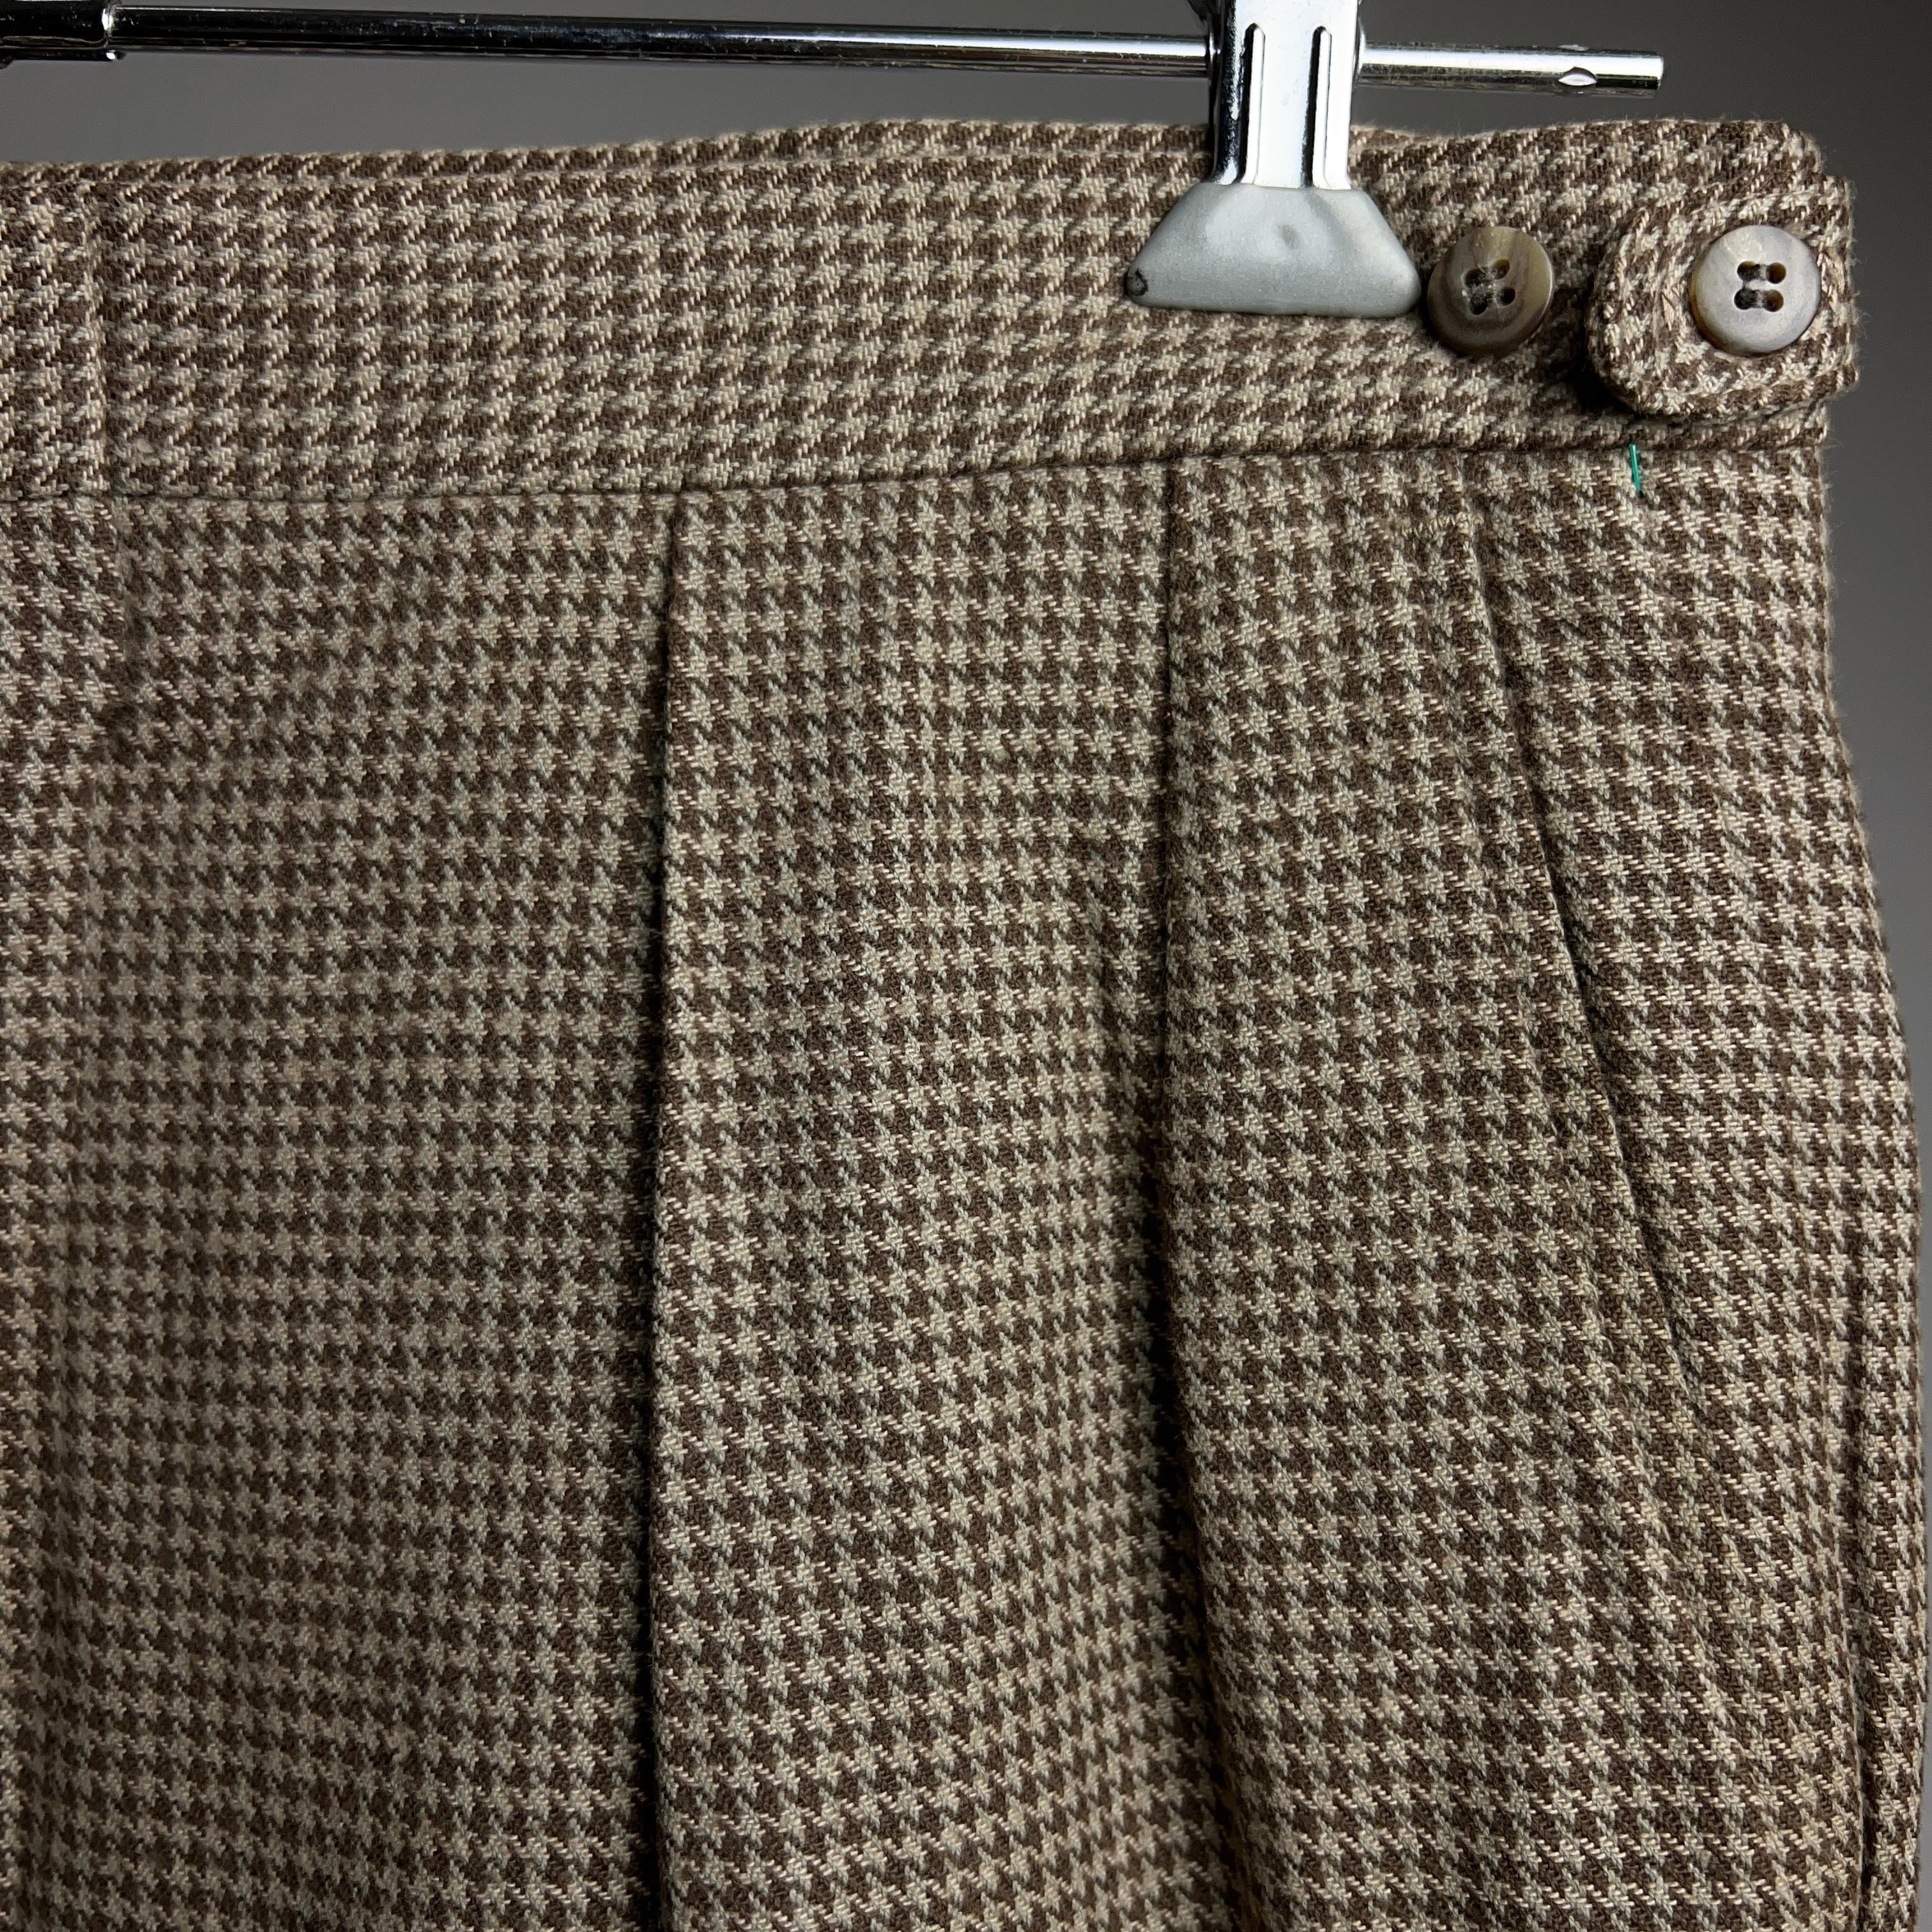 90's Polo by Ralph Lauren Houndstooth Check Slacks USA製 SIZE 34 ...